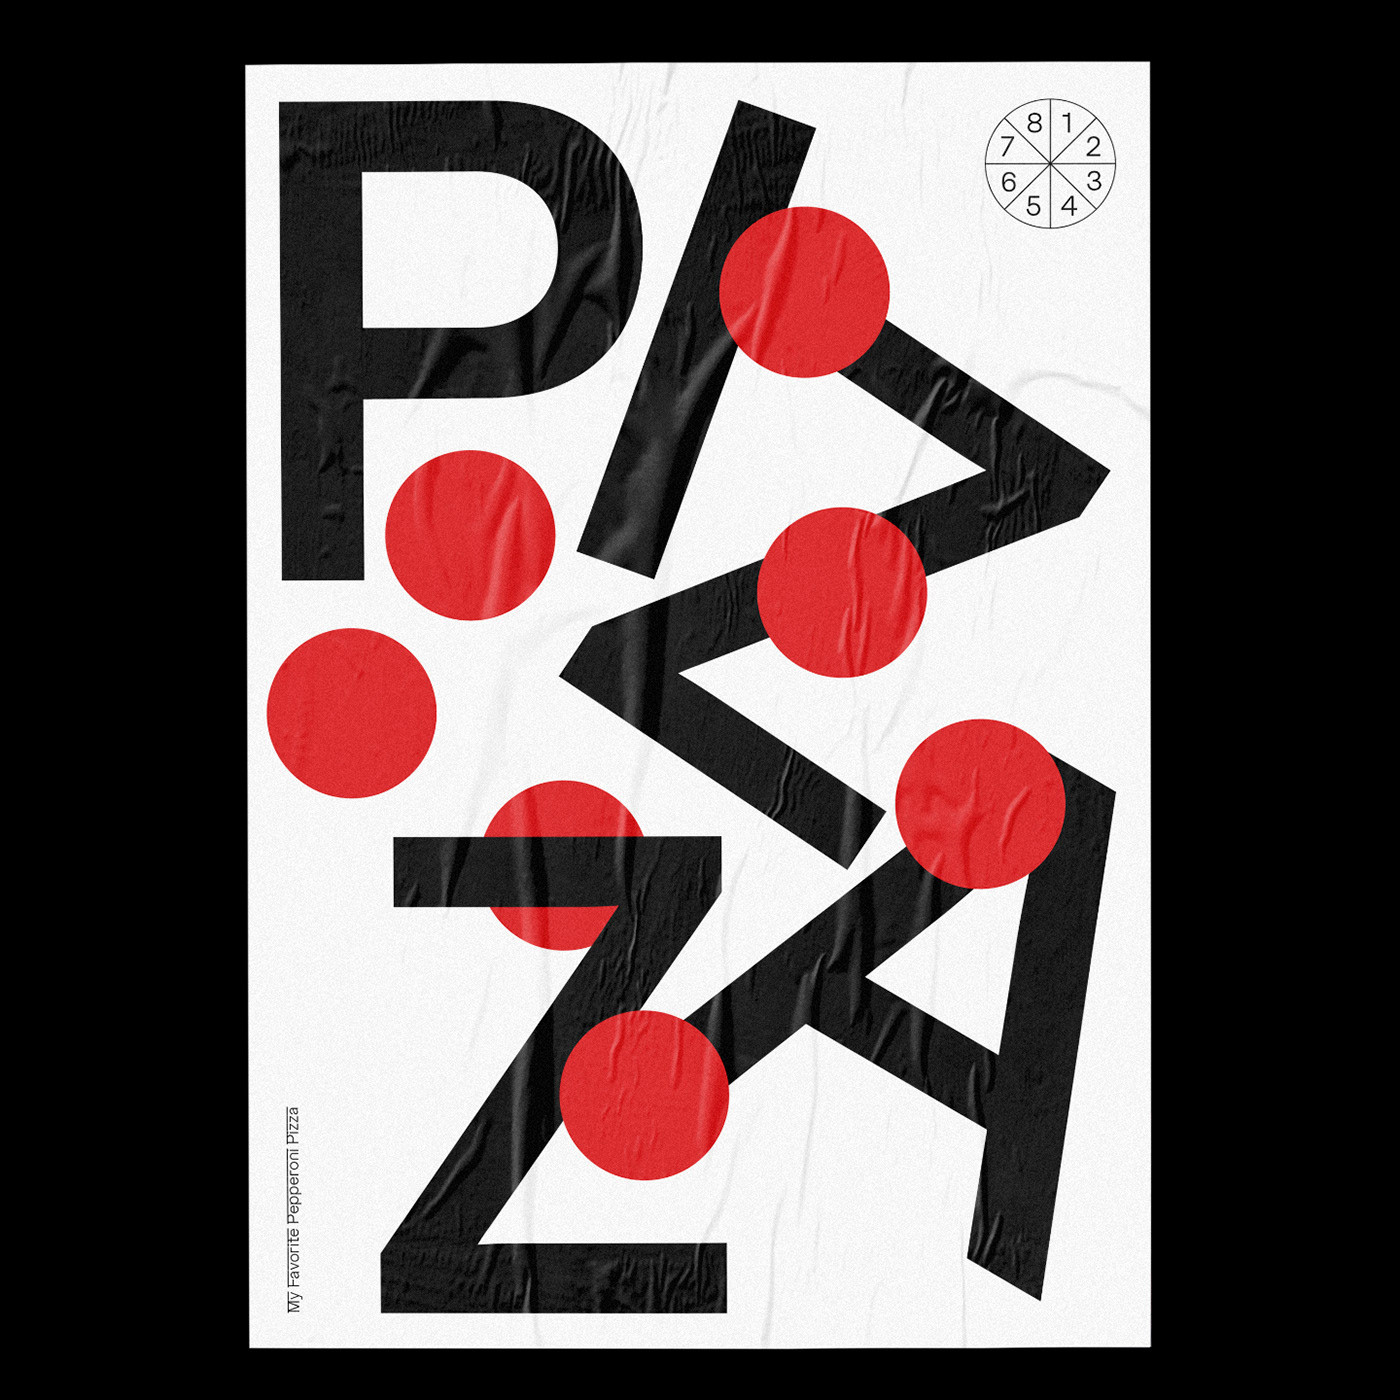 contest editorial font geometry iconic Letterform Pizza poster symbol Typeface